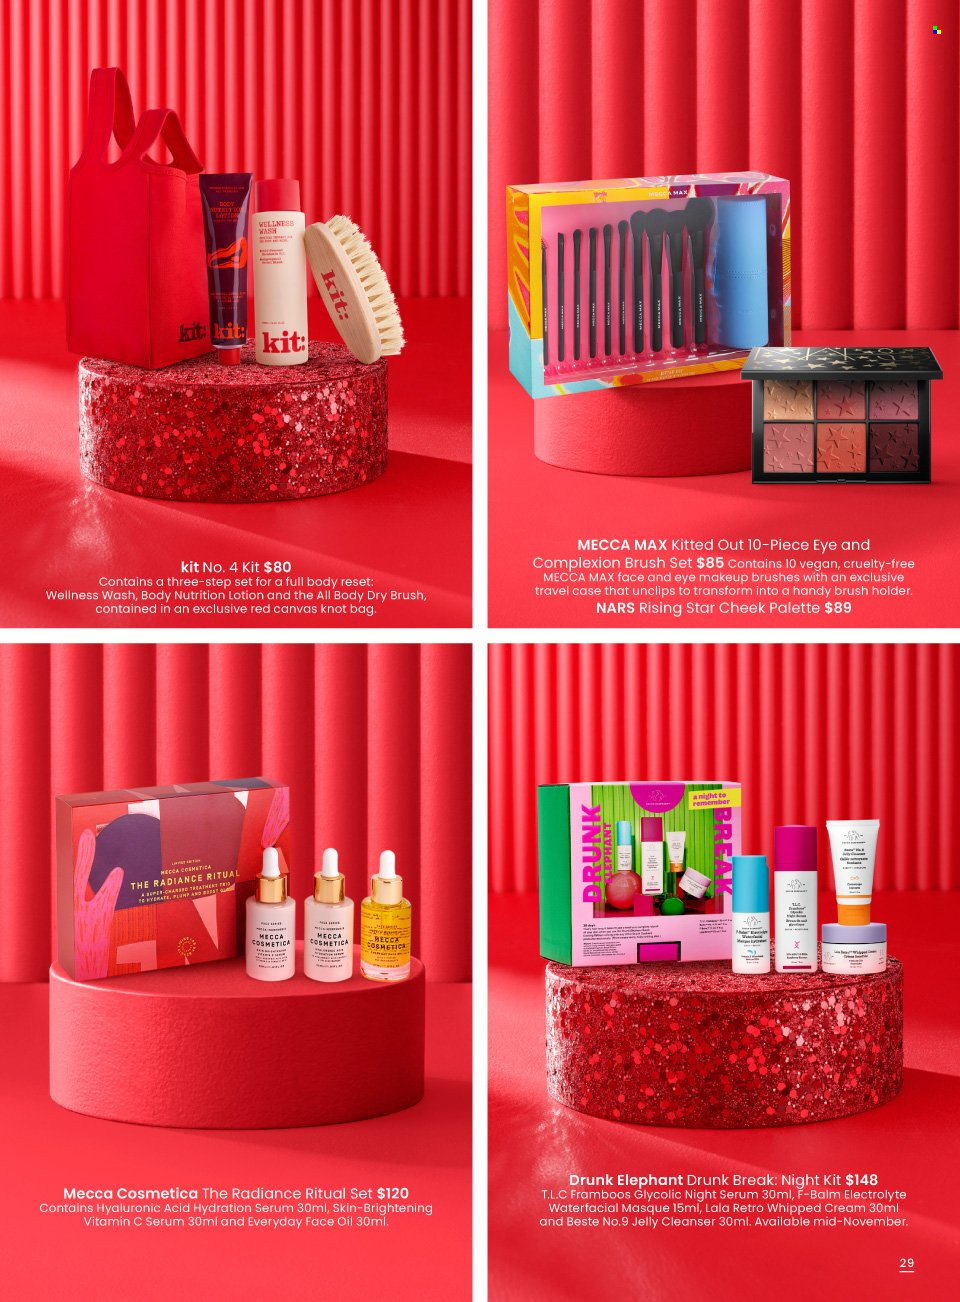 thumbnail - Myer Catalogue - Sales products - serum, jelly cleanser, facial oil, Palette, body lotion, holder, brush set, bag, canvas. Page 29.